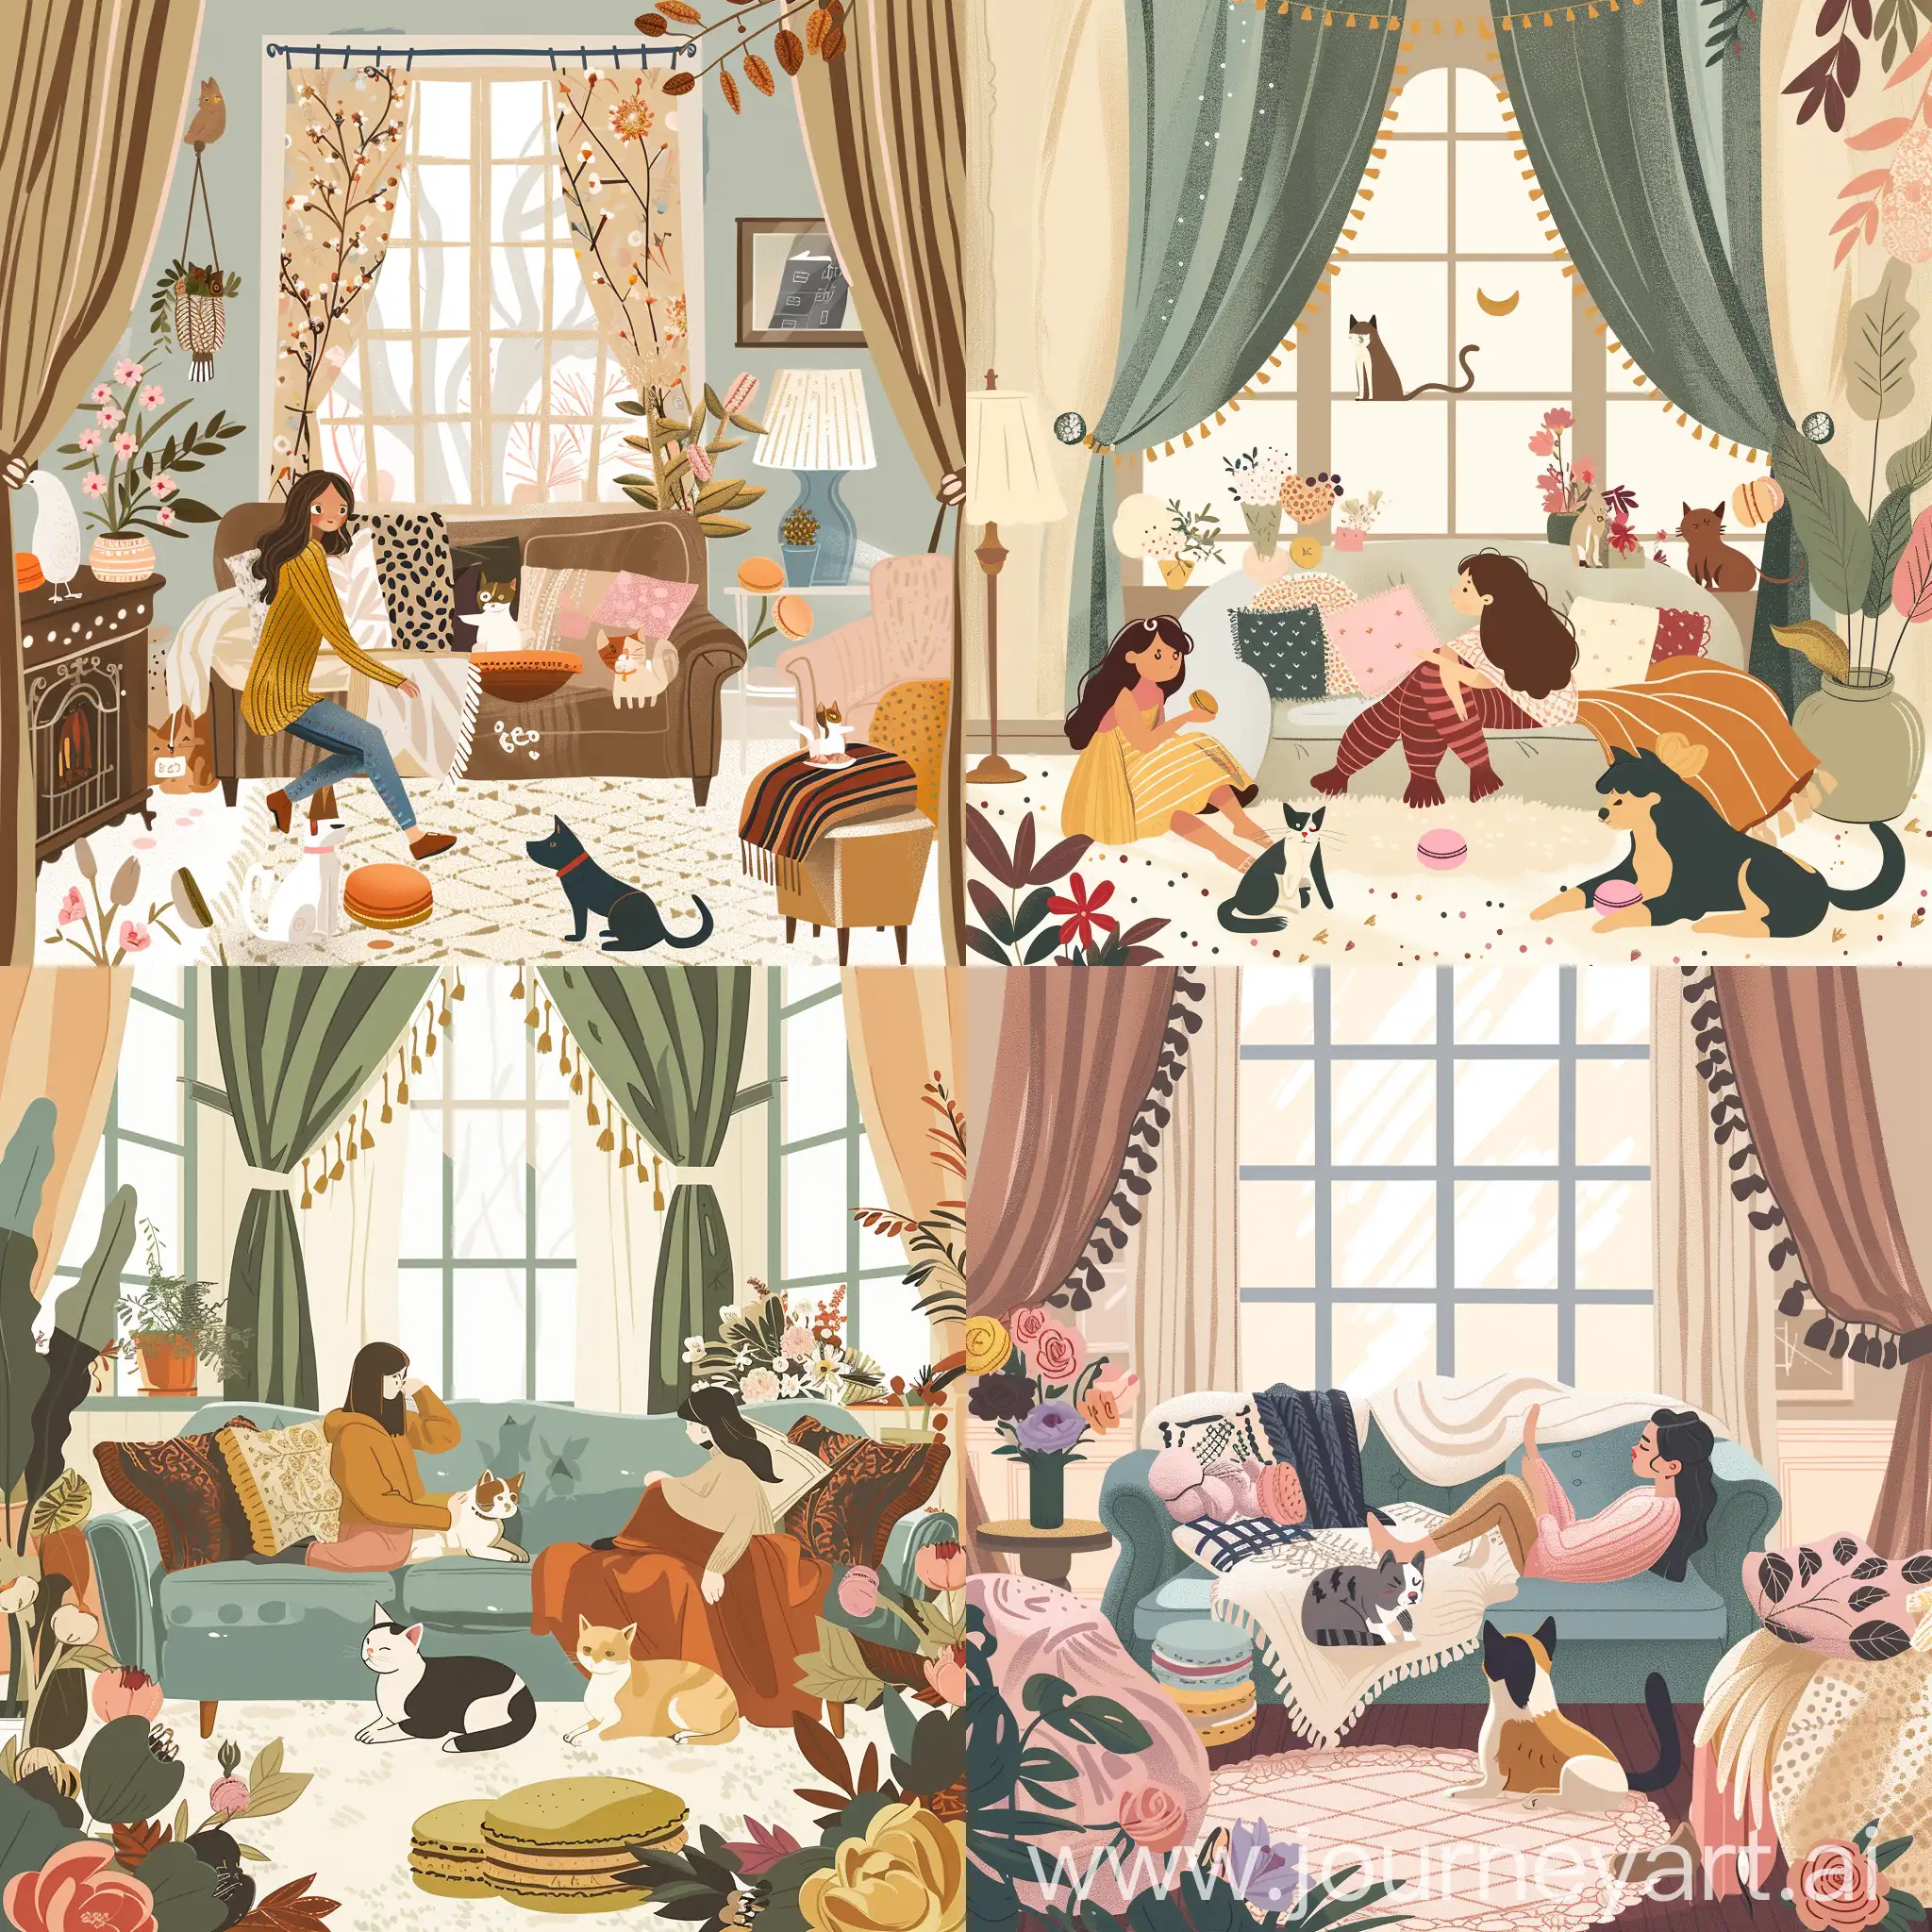 Harmonious-Coexistence-Girls-and-Pets-in-a-Cozy-MacaronColored-Room